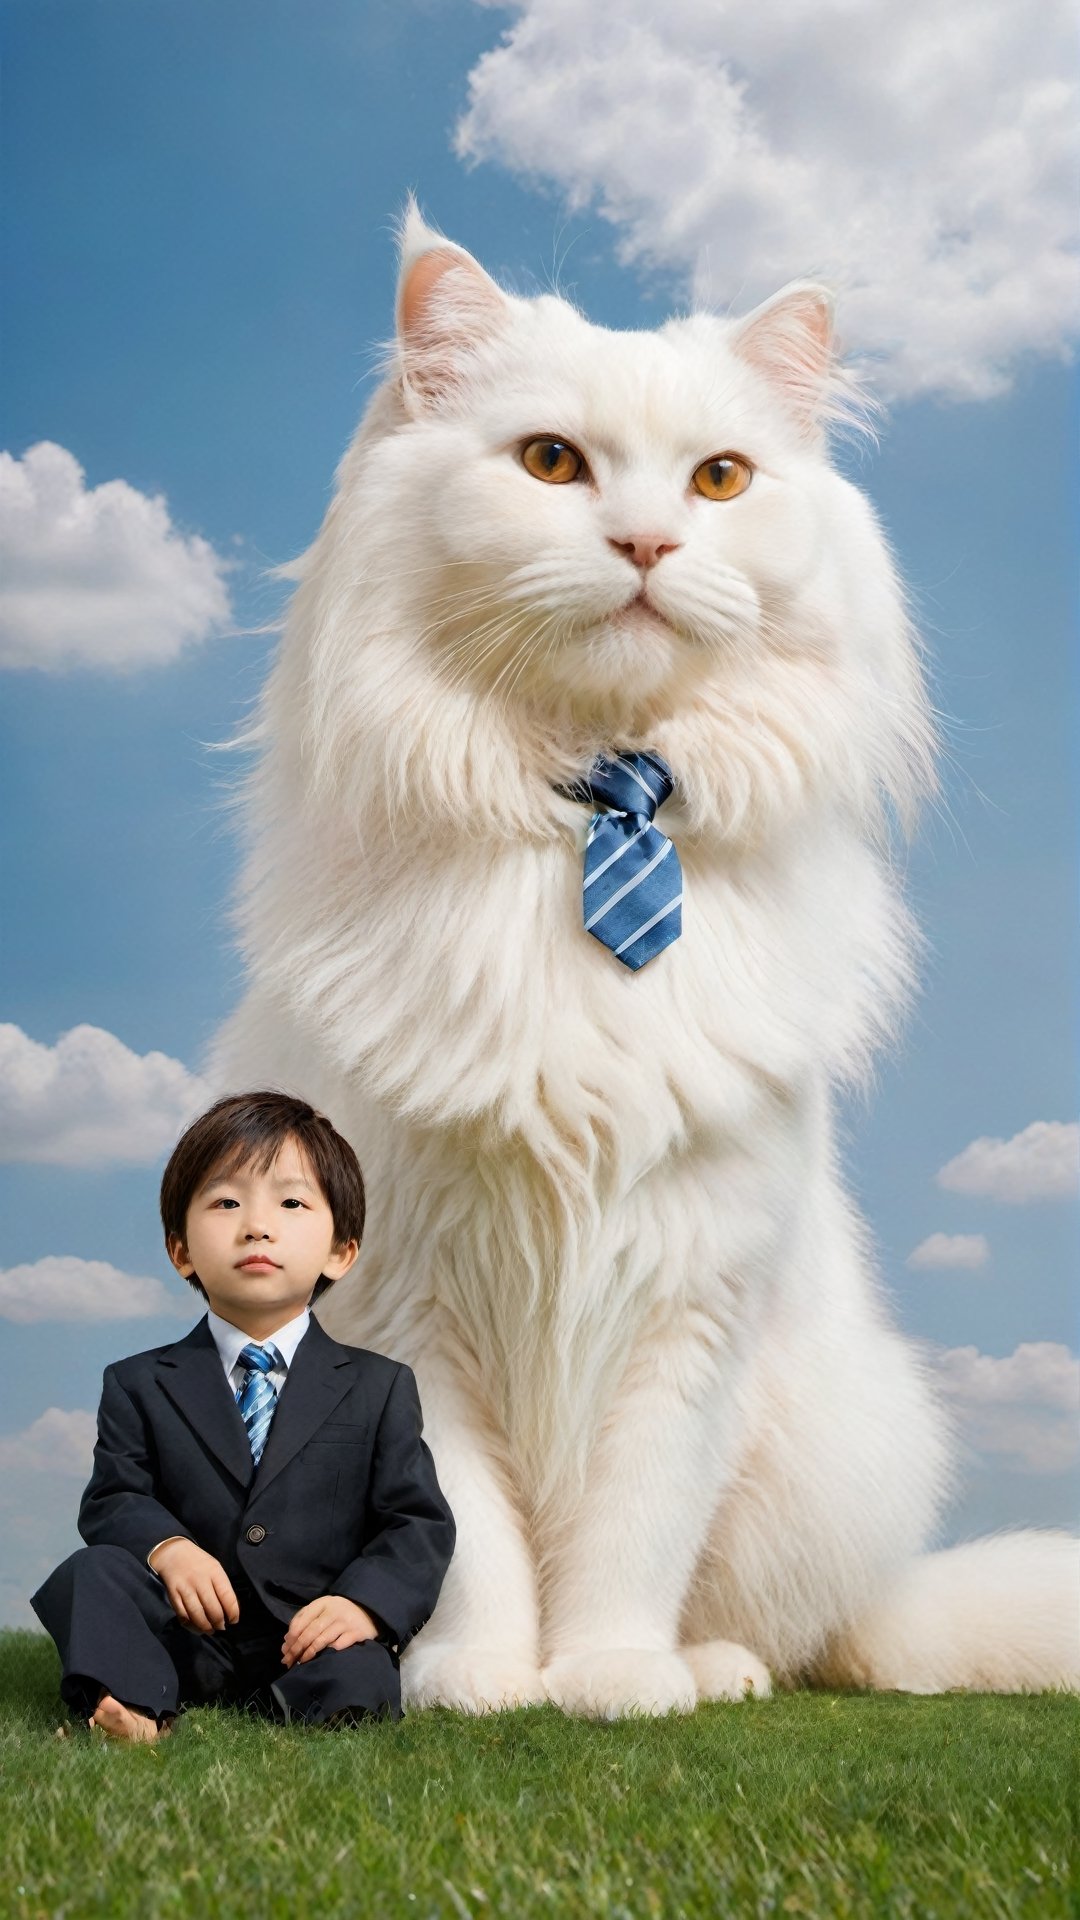 Realistic photo of a huge longhaired white cat with brown eyes sitting on the grass in front of a little shot haircut Asian boy wearing a suit and tie. The photo has a blue sky background with clouds and uses natural light, with super detailed photography in the style of movie lighting effects and bright colors. It is a full body portrait